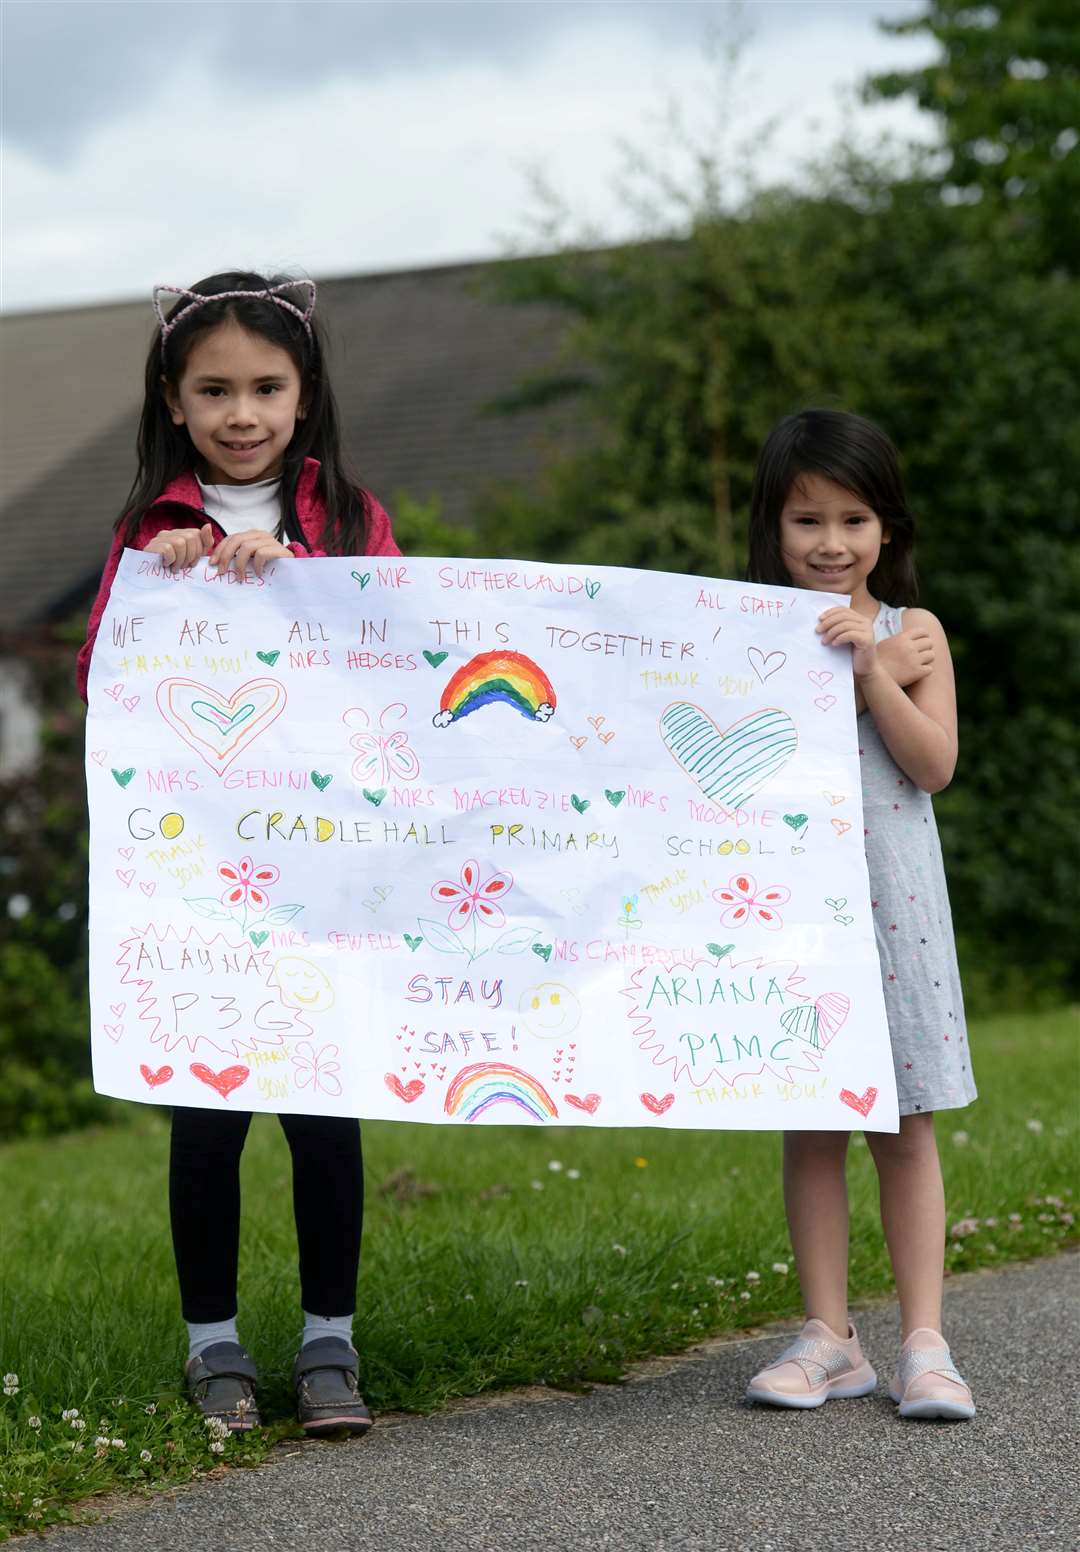 Alayna and Ariana Hunter made their own banner.